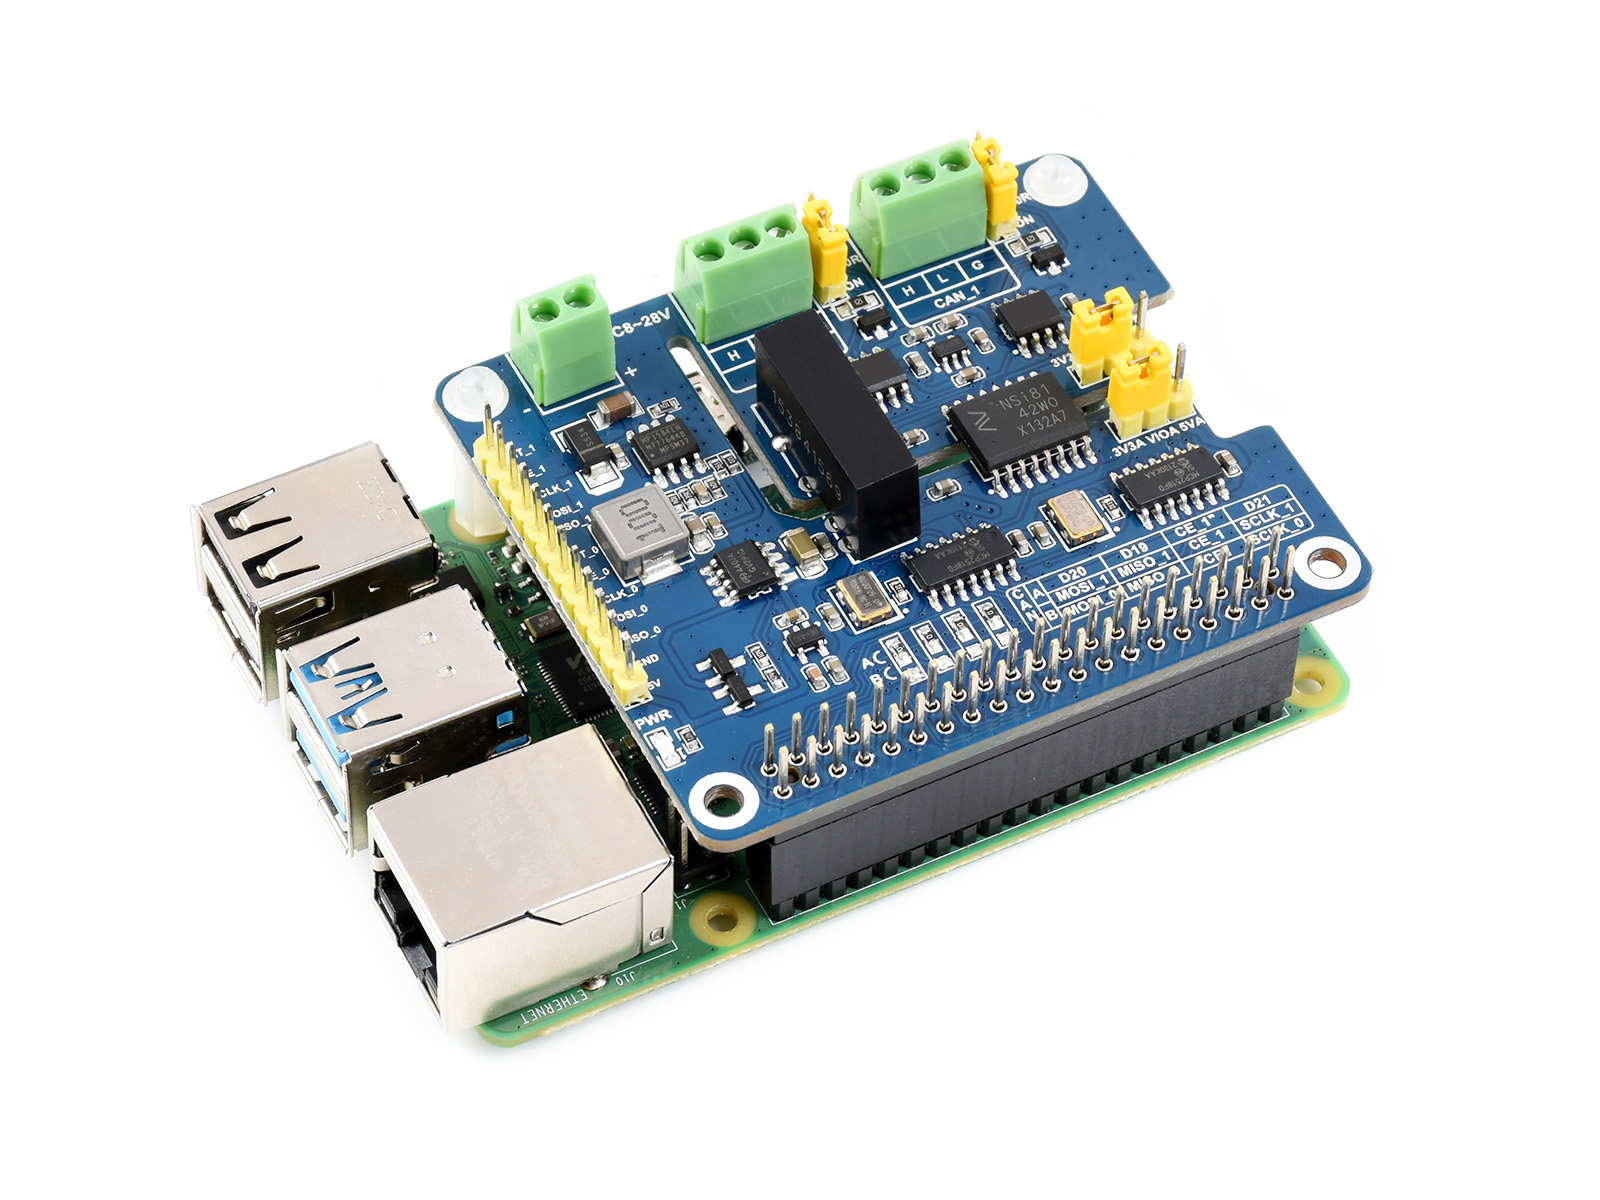 2-Channel Isolated CAN FD Expansion HAT for Raspberry Pi, Multi Protections